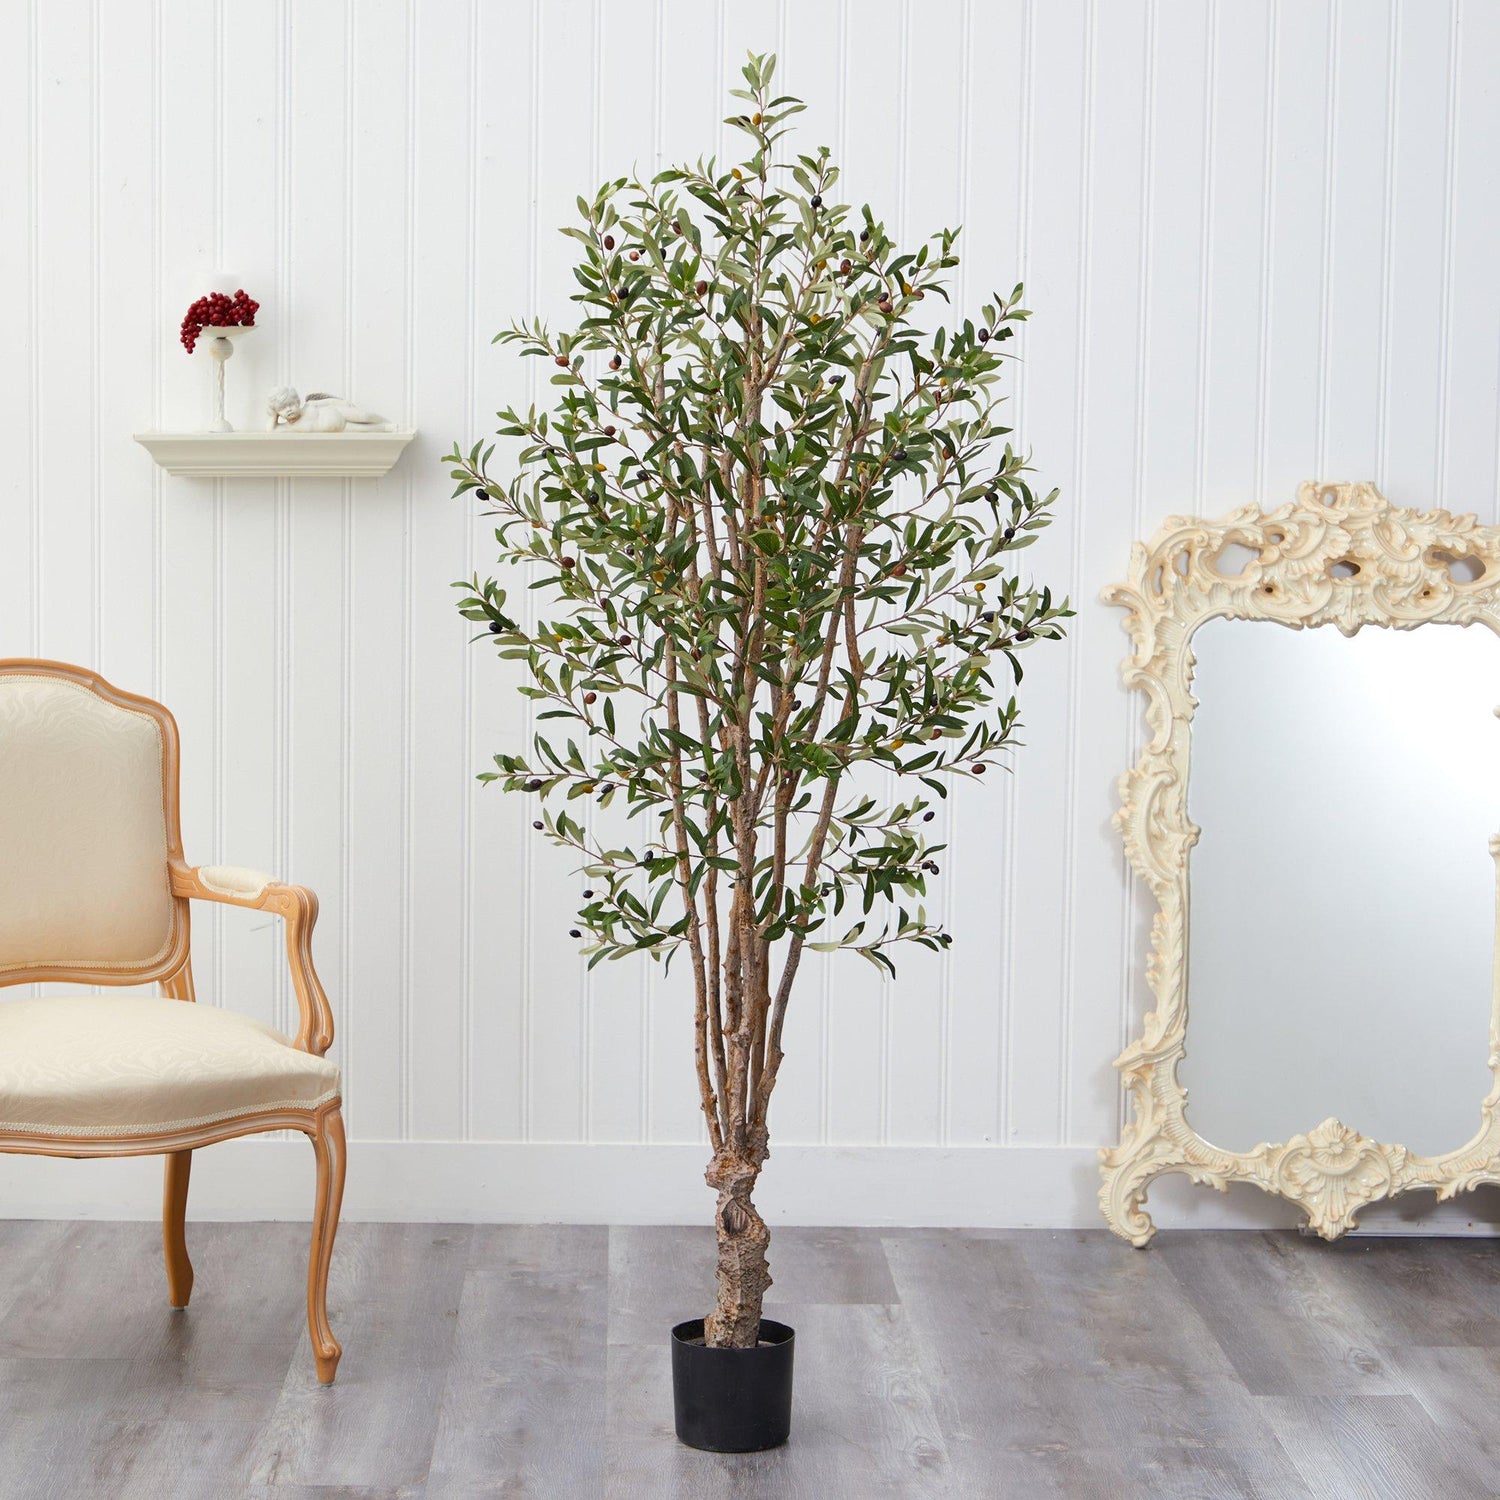 6’ Olive Artificial Tree with 1656 Leaves